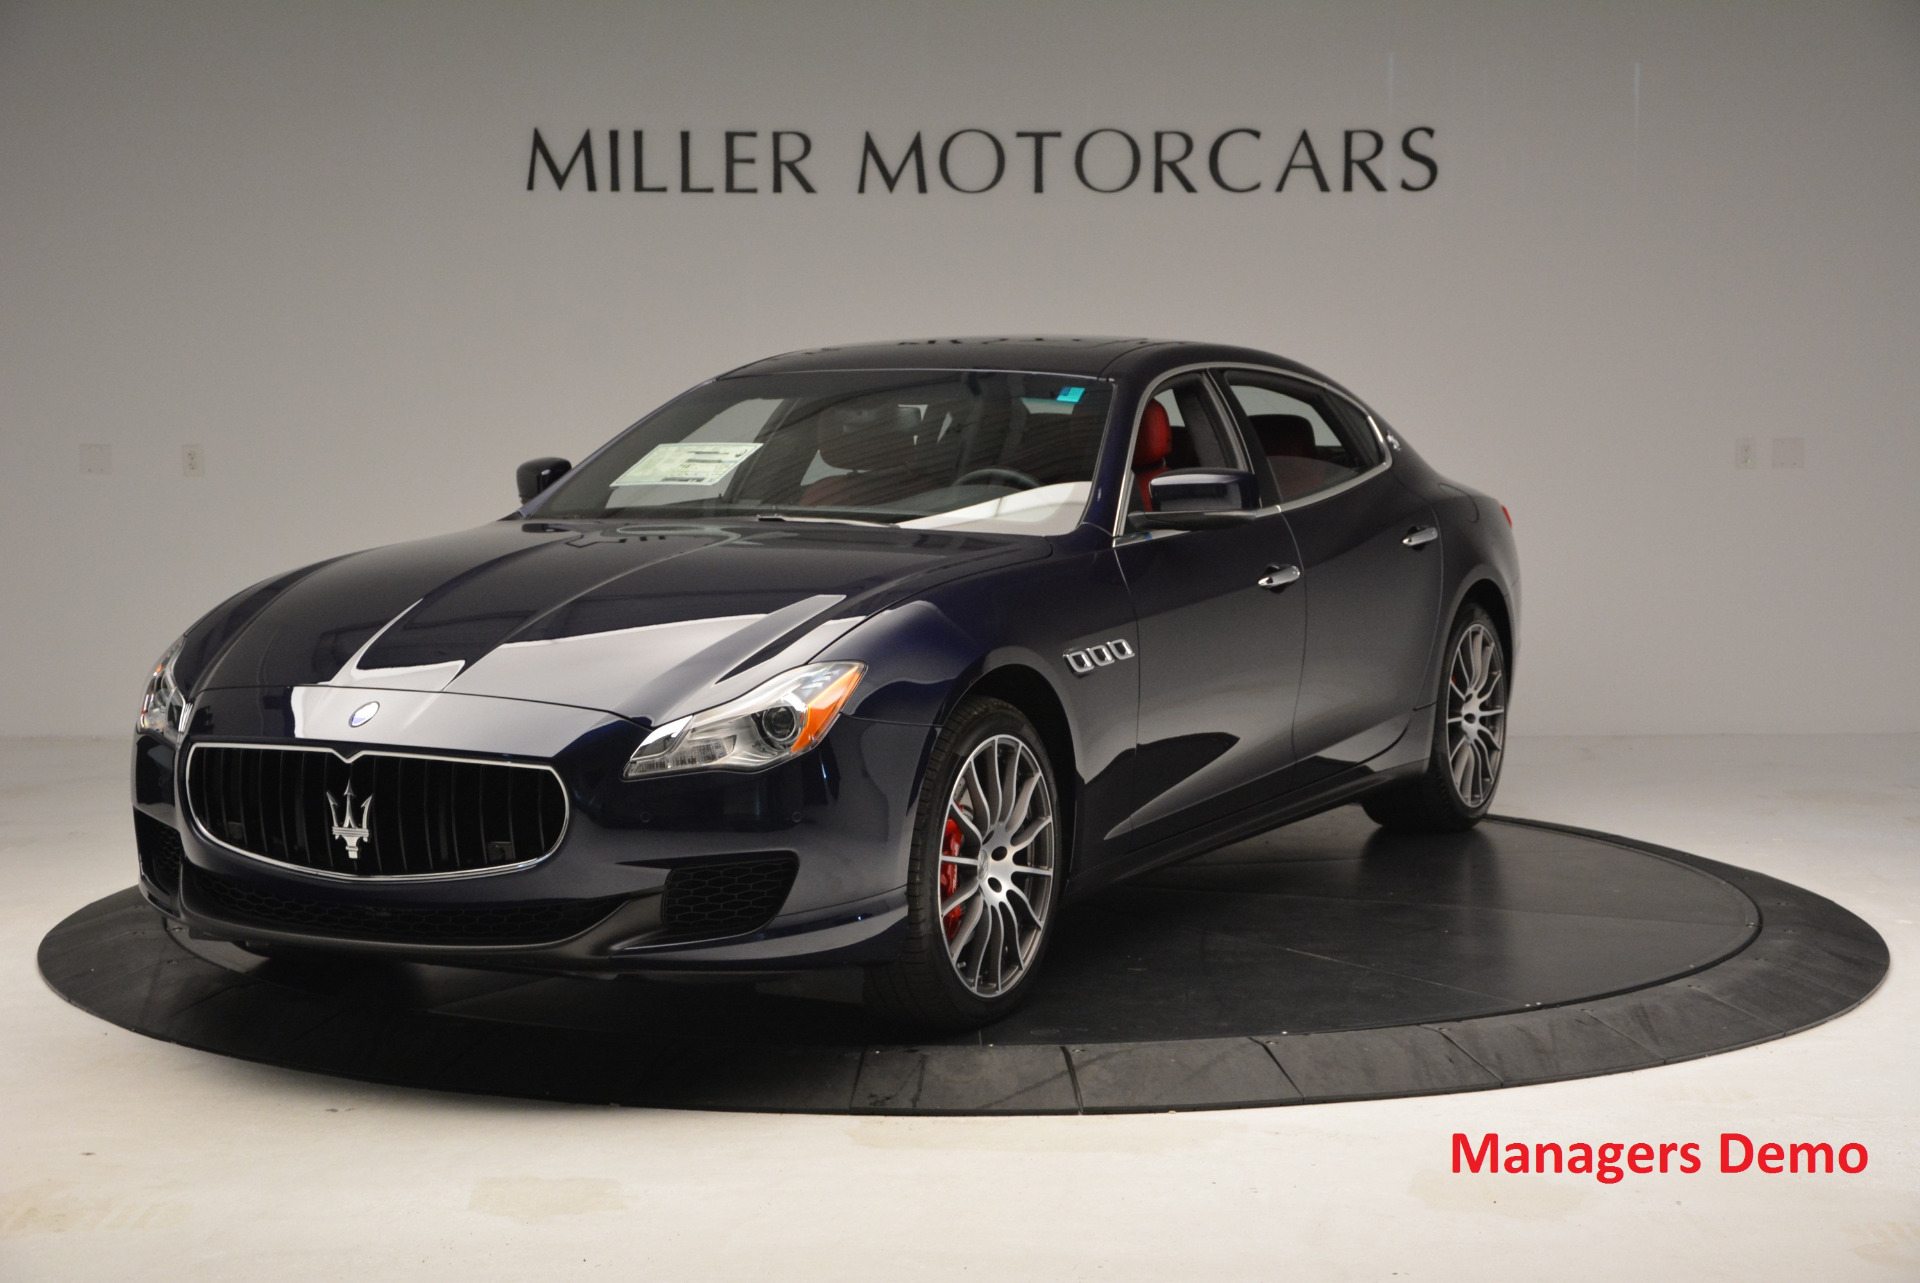 New 2016 Maserati Quattroporte S Q4  *******      DEALERS  DEMO for sale Sold at Rolls-Royce Motor Cars Greenwich in Greenwich CT 06830 1